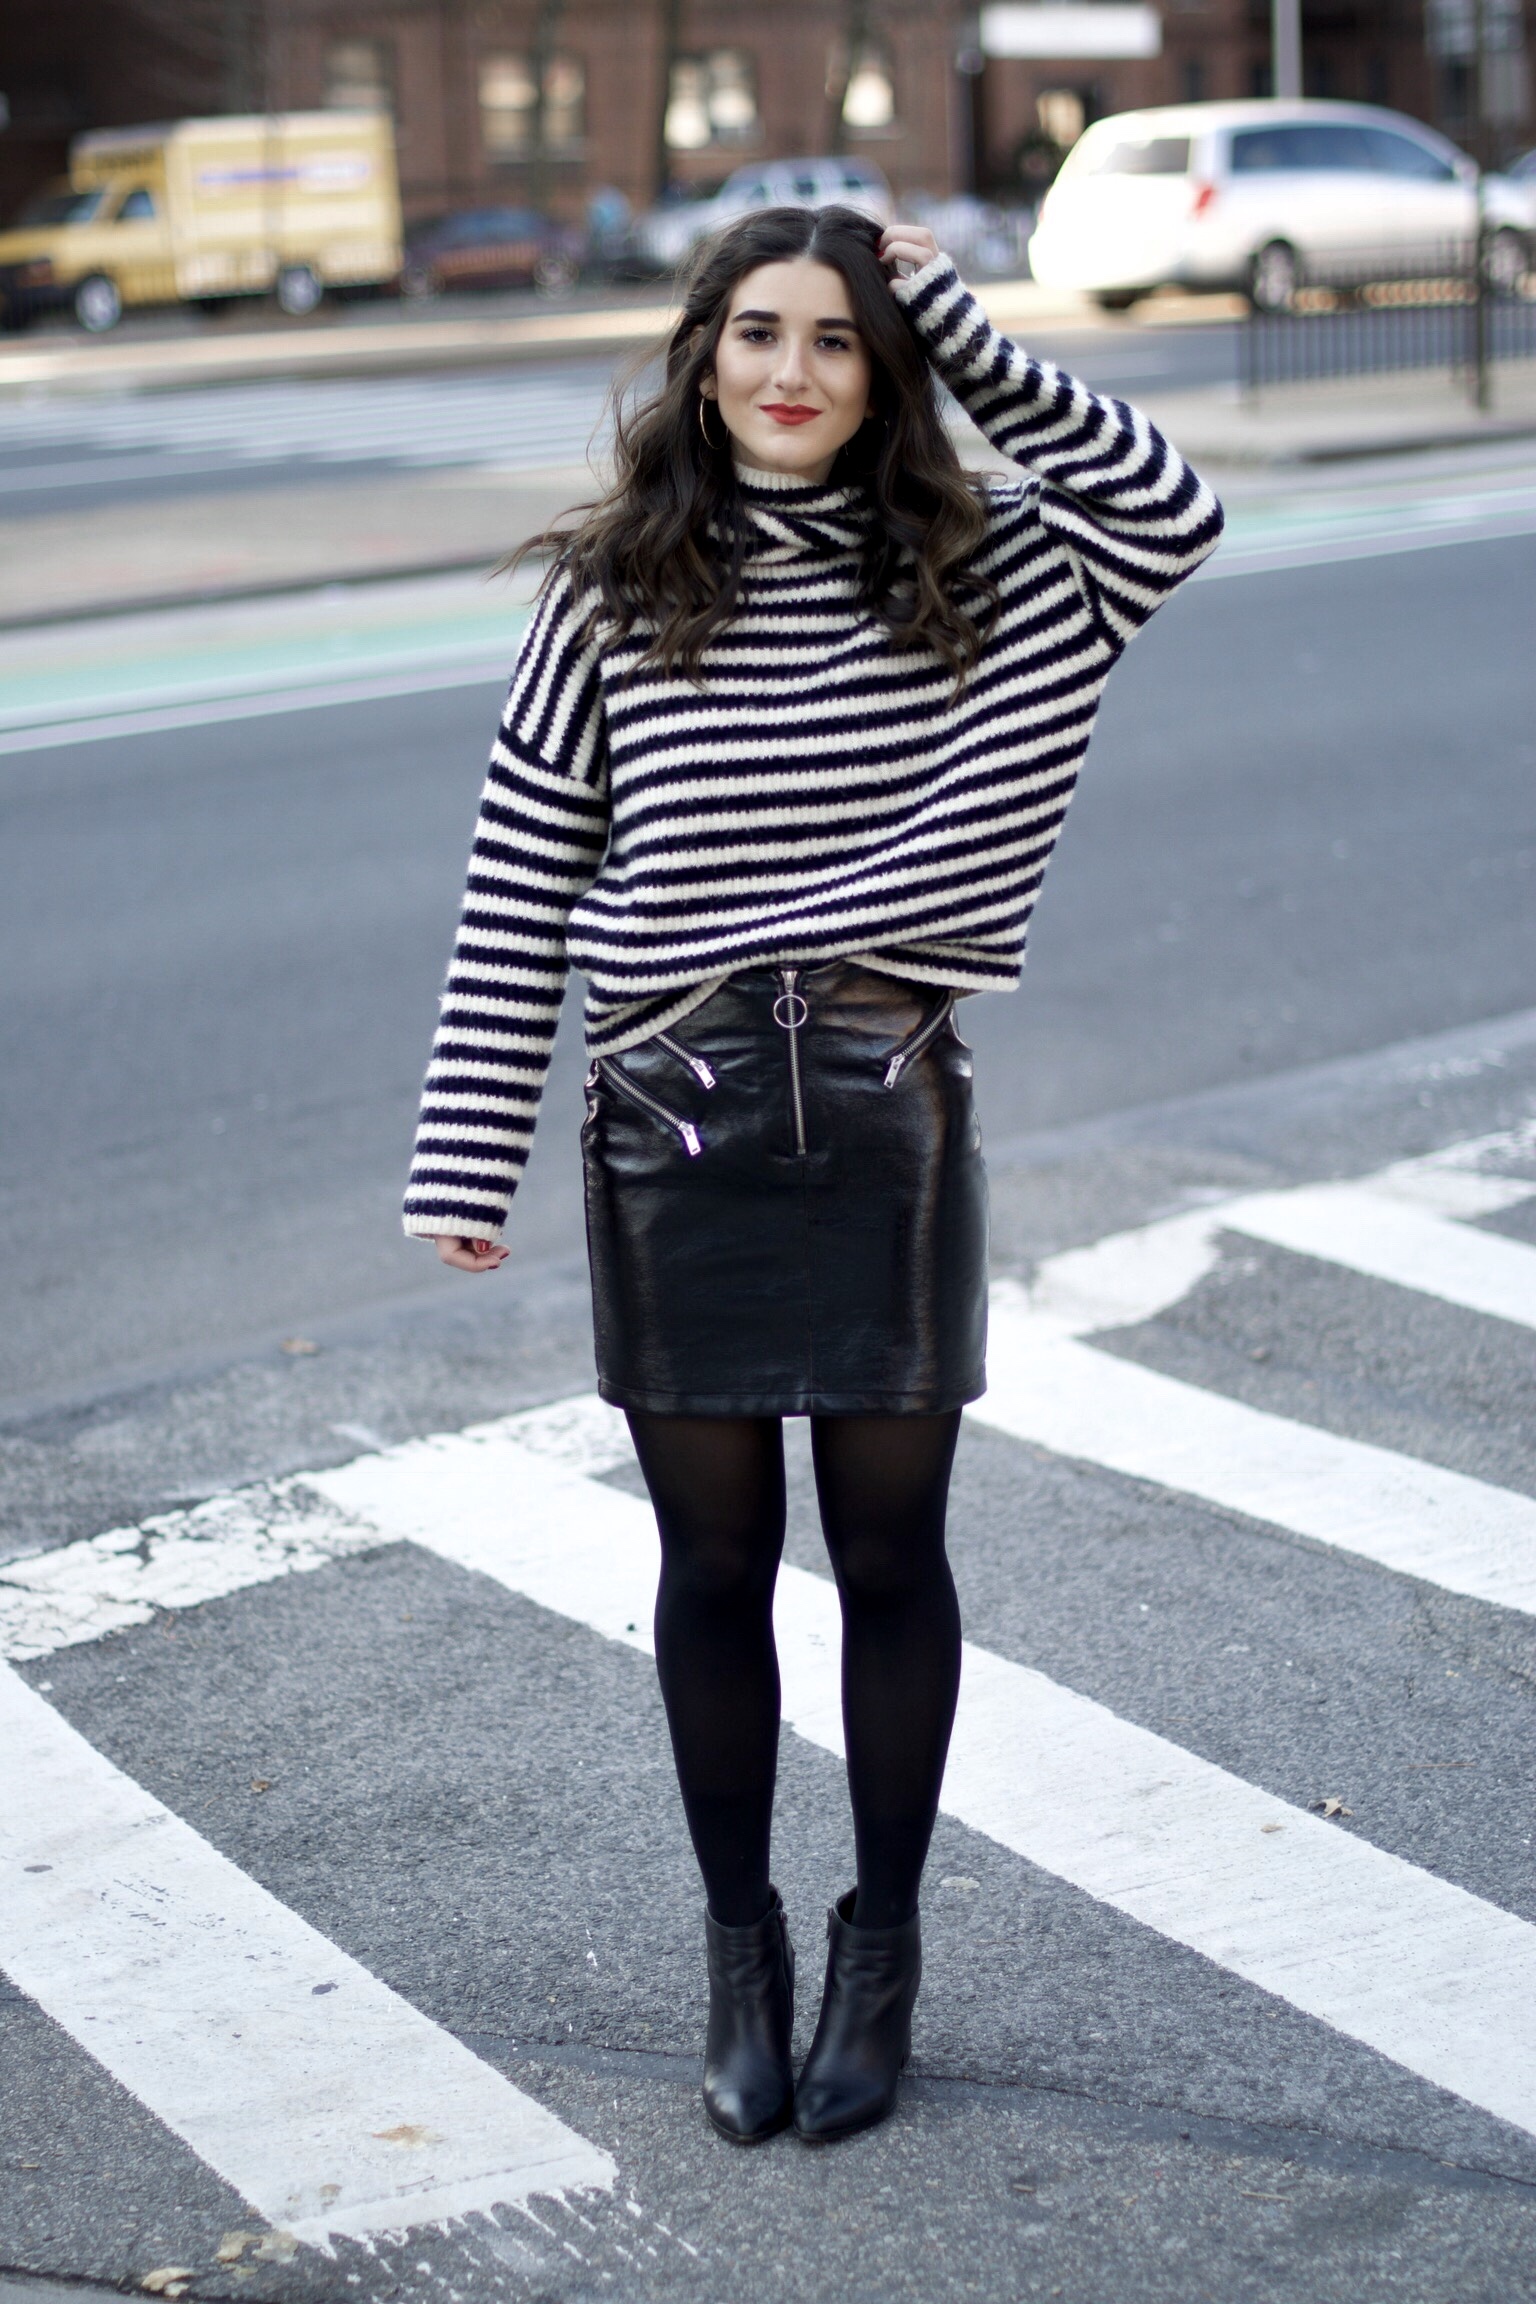 Striped Turtleneck Sweater + Pleather Skirt The Right Way To Ask Someone To Meet For Coffee Esther Santer Fashion Blog NYC Street Style Blogger Outfit OOTD Trendy Girl Women Black White Tights Ankle Booties  Winter Hoops Earrings Wavy Hair Shop Shoes.jpg